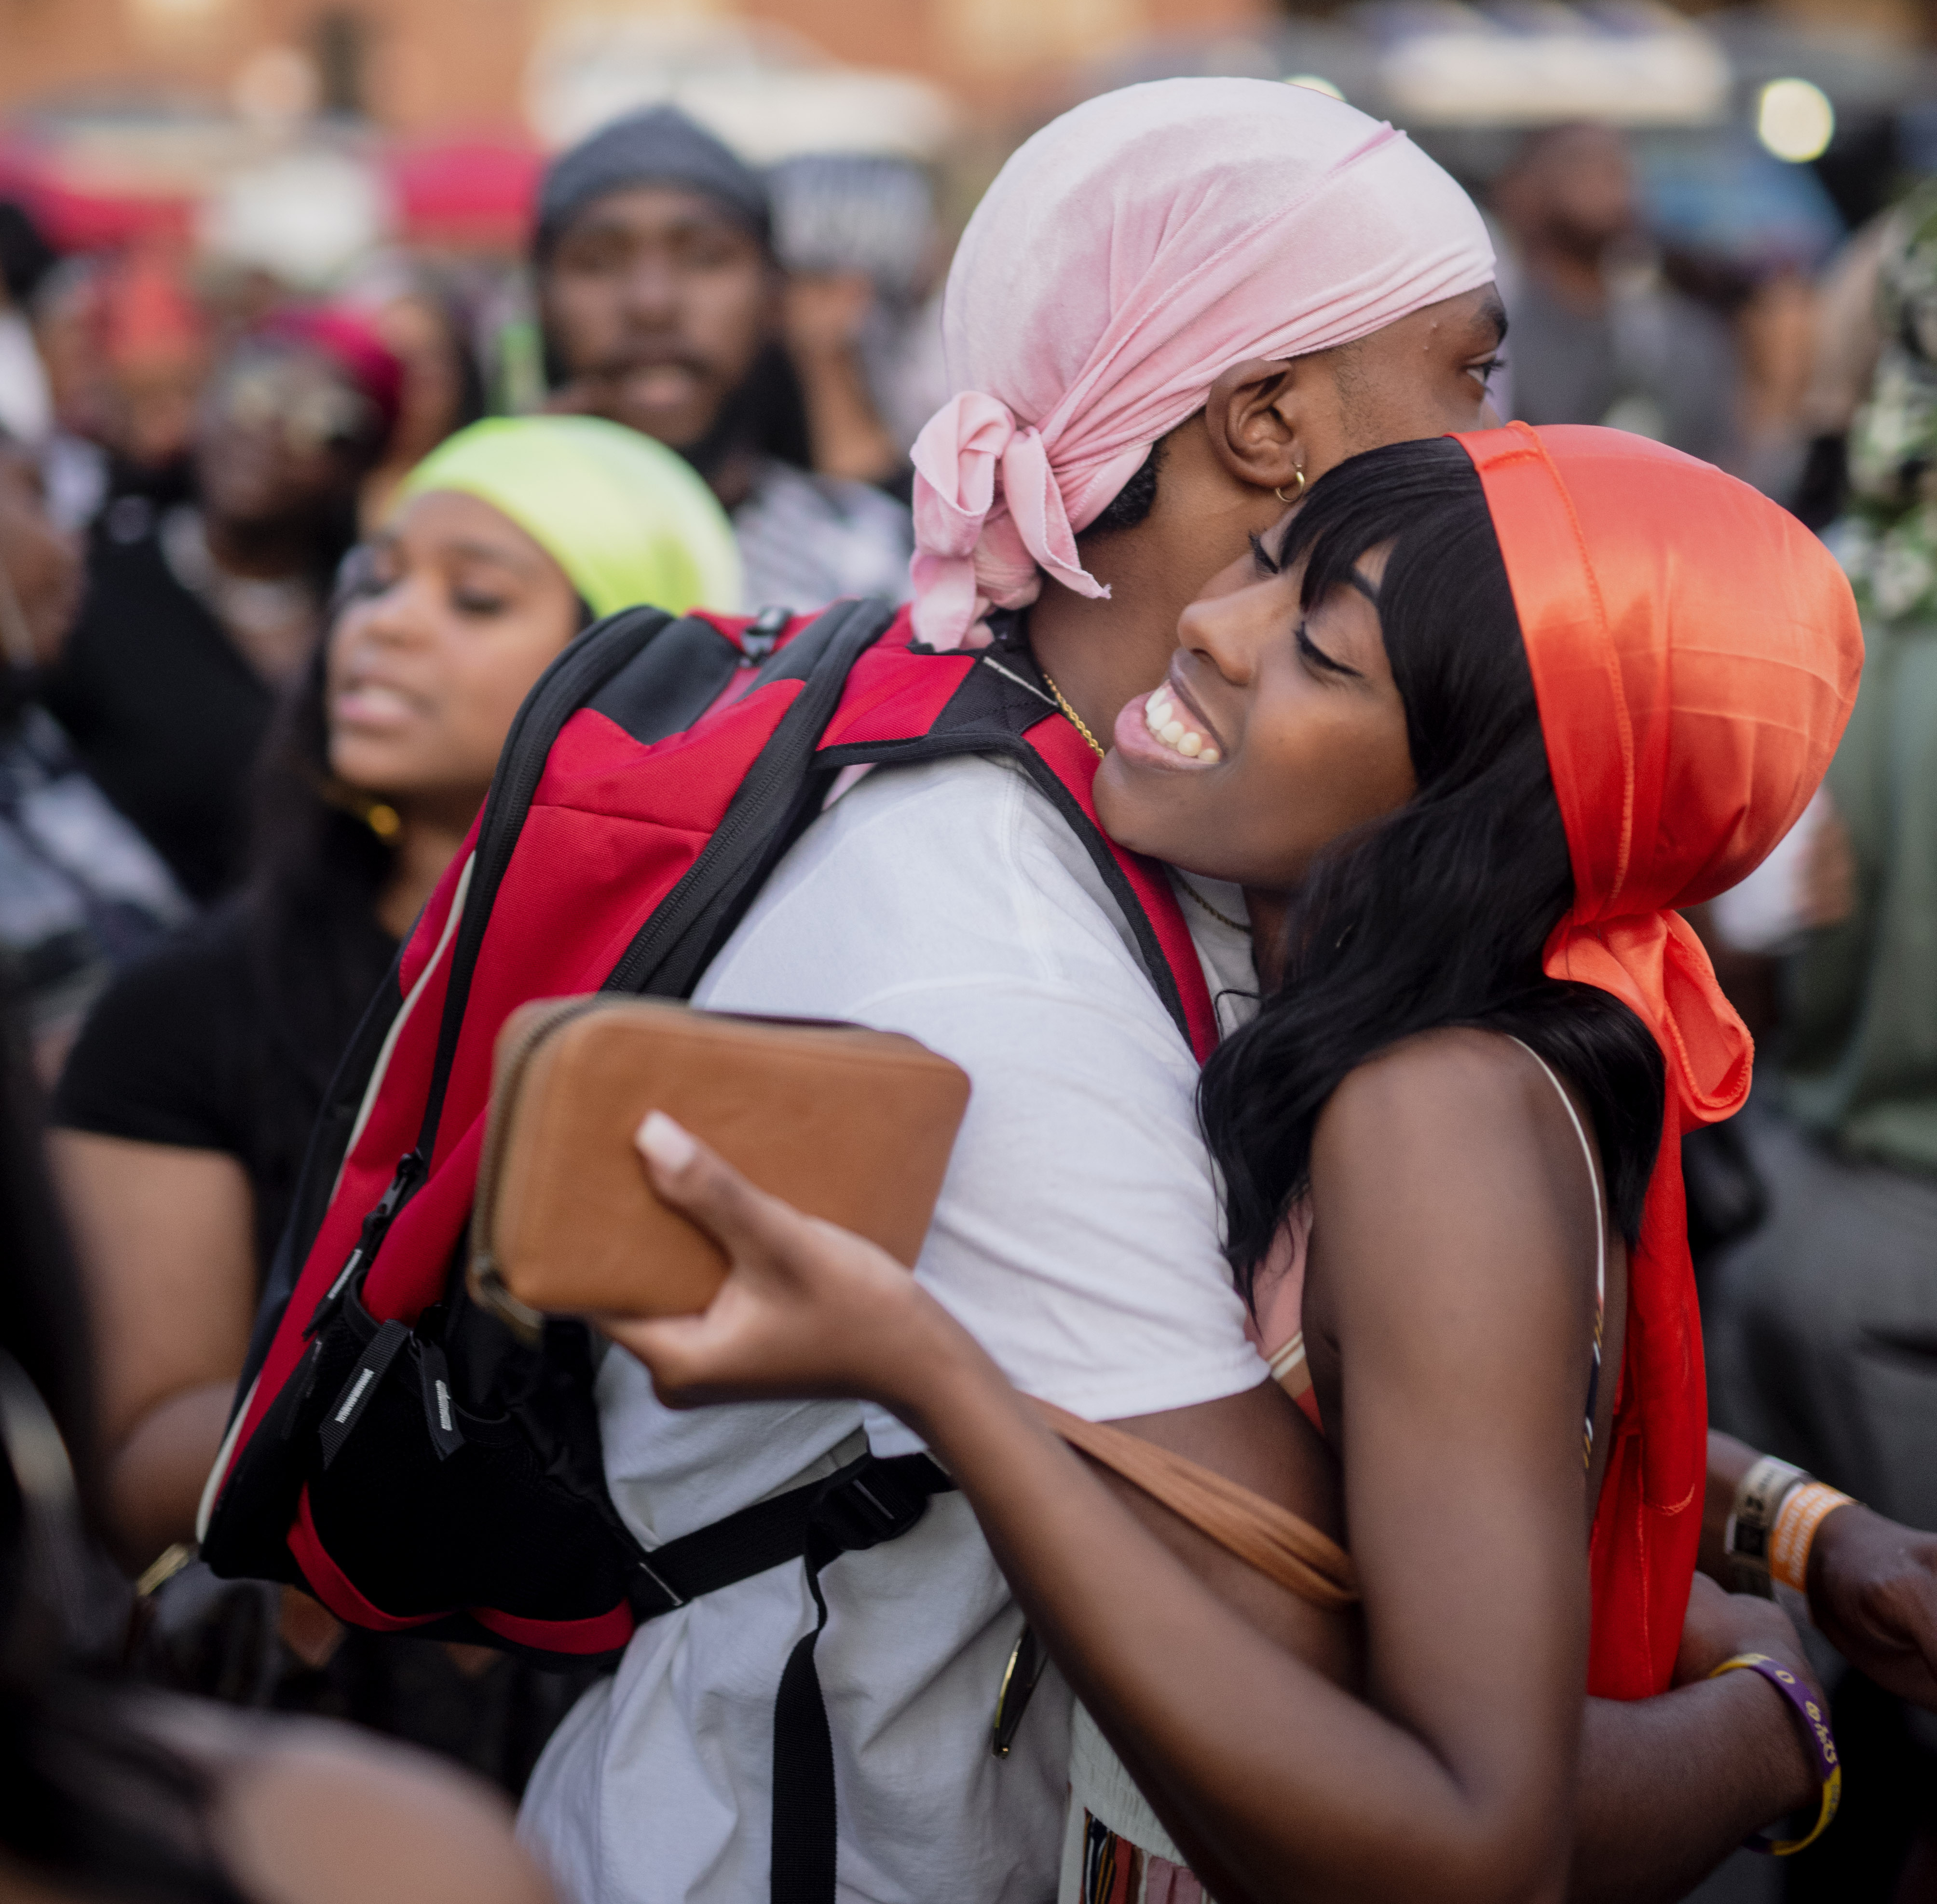 People wear durags proudly at a previous Durag Festival.